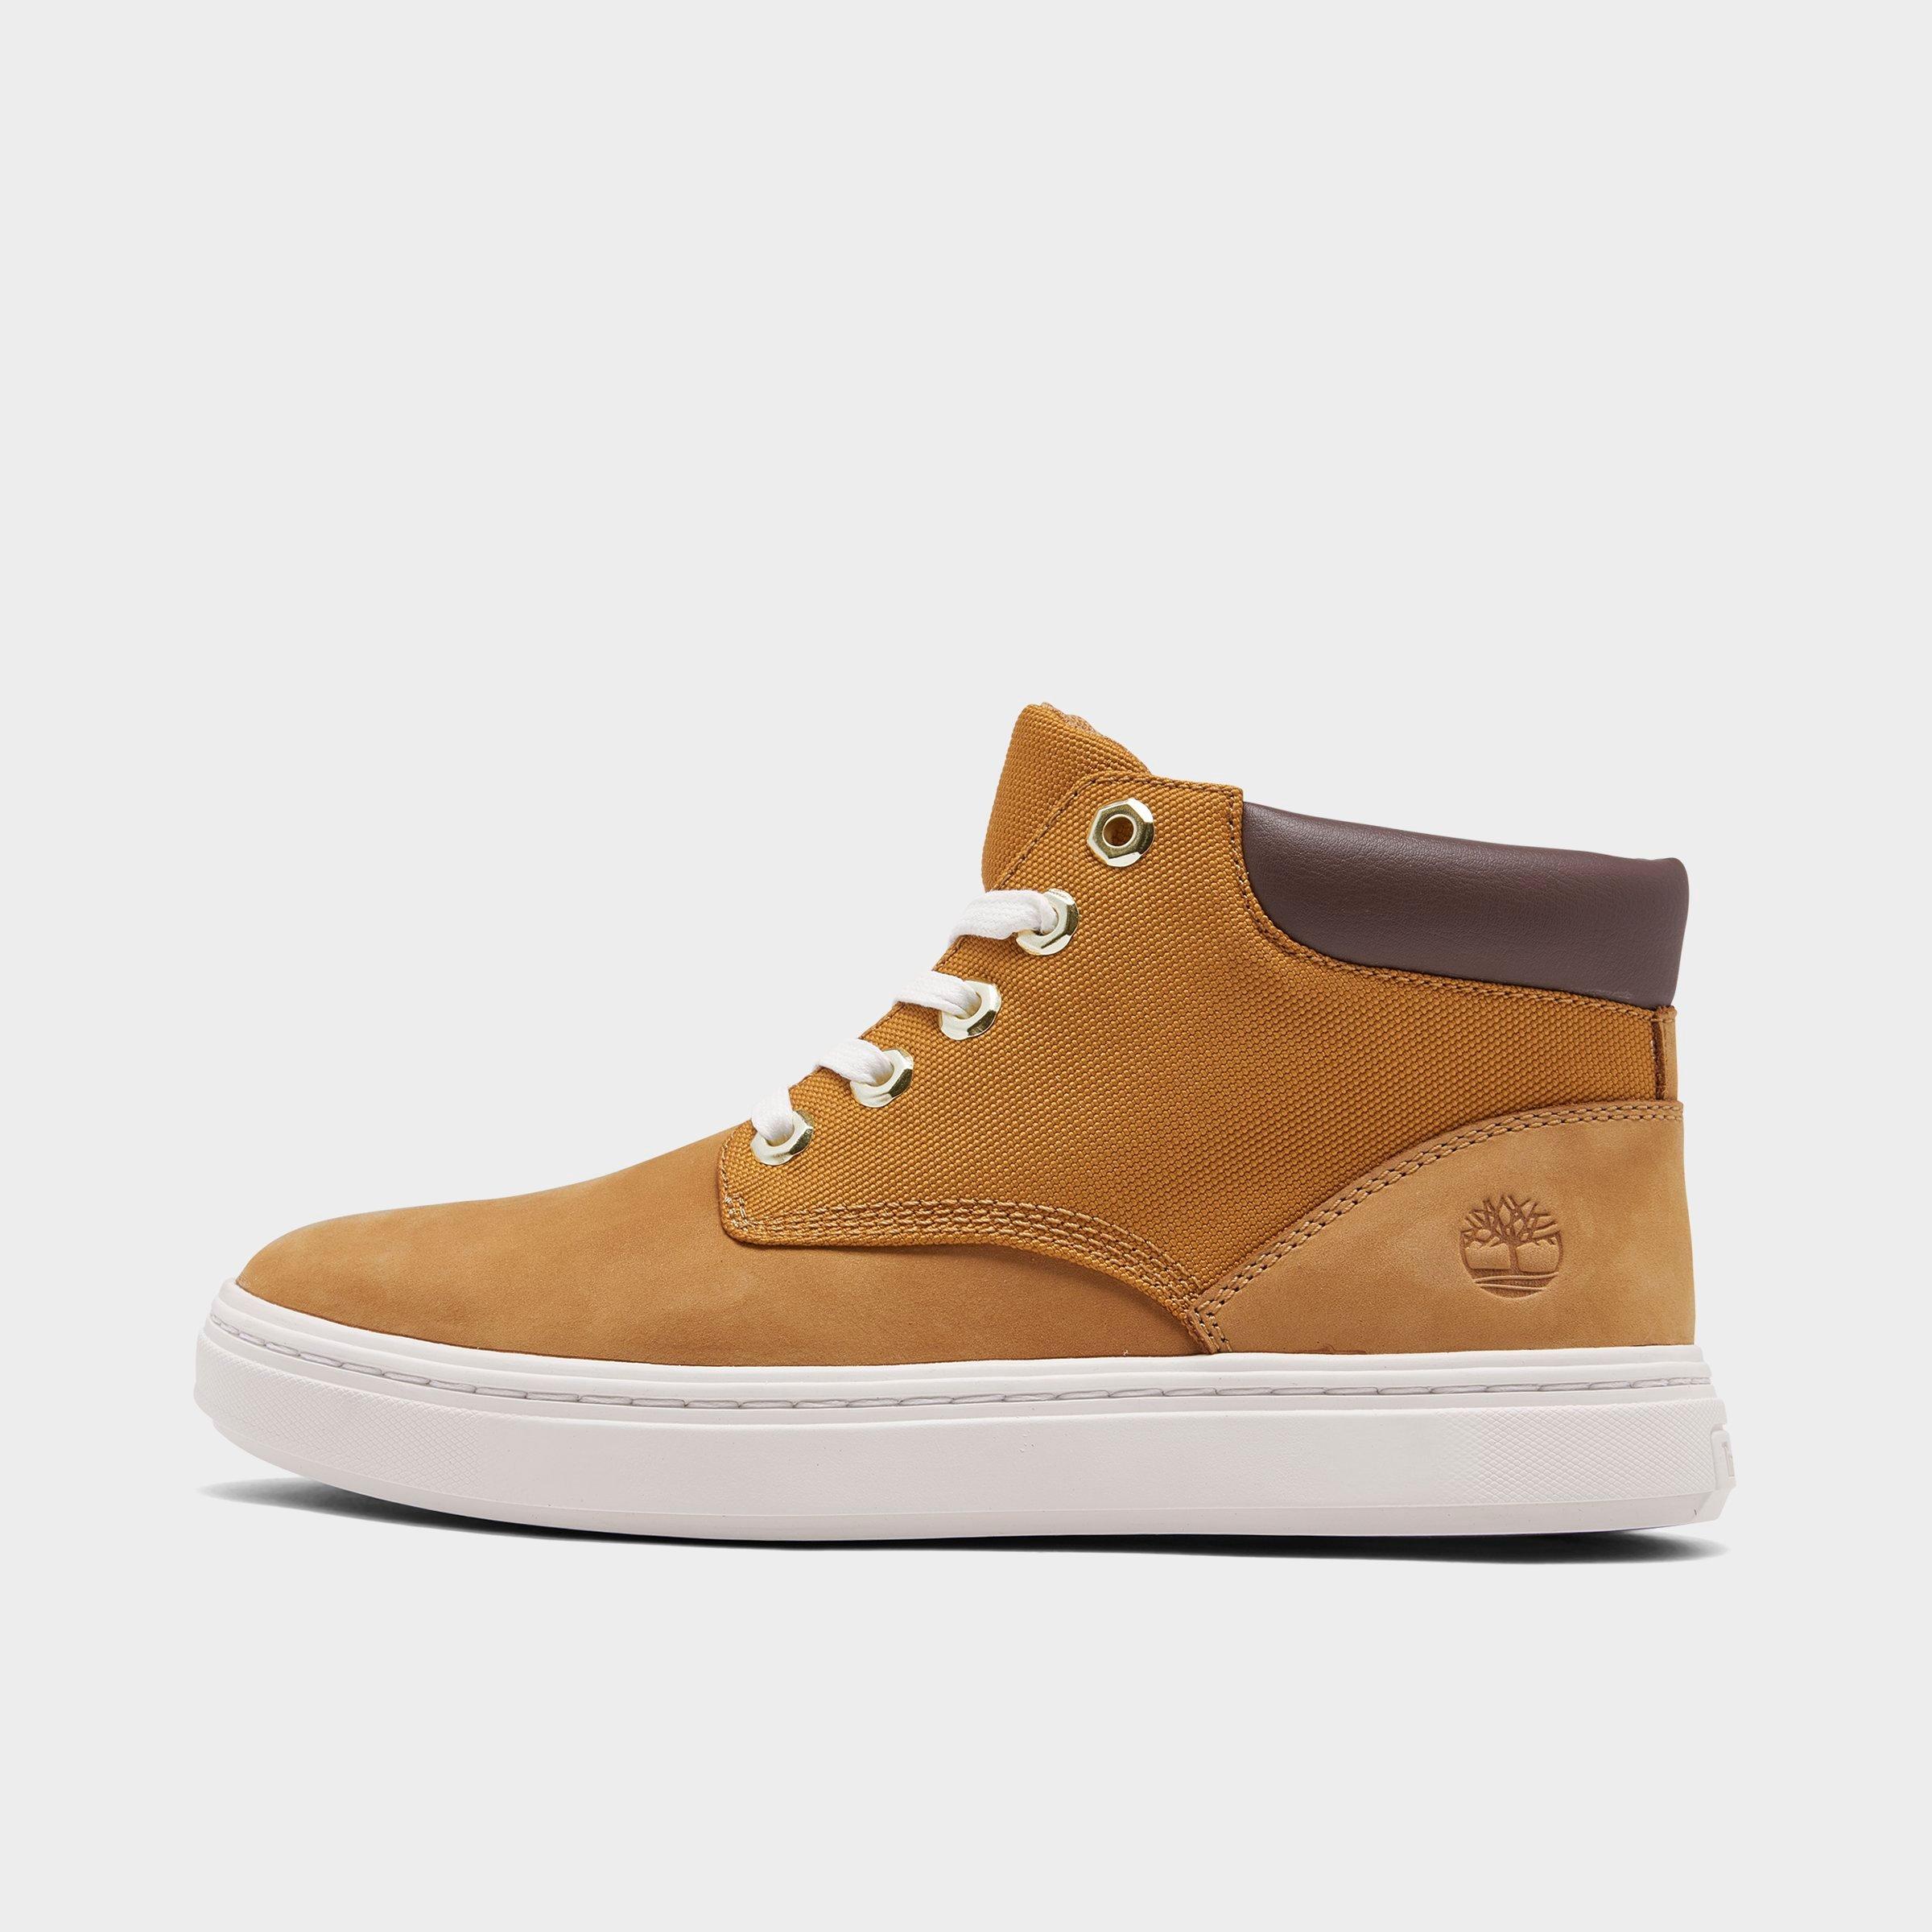 timberland high top sneakers womens